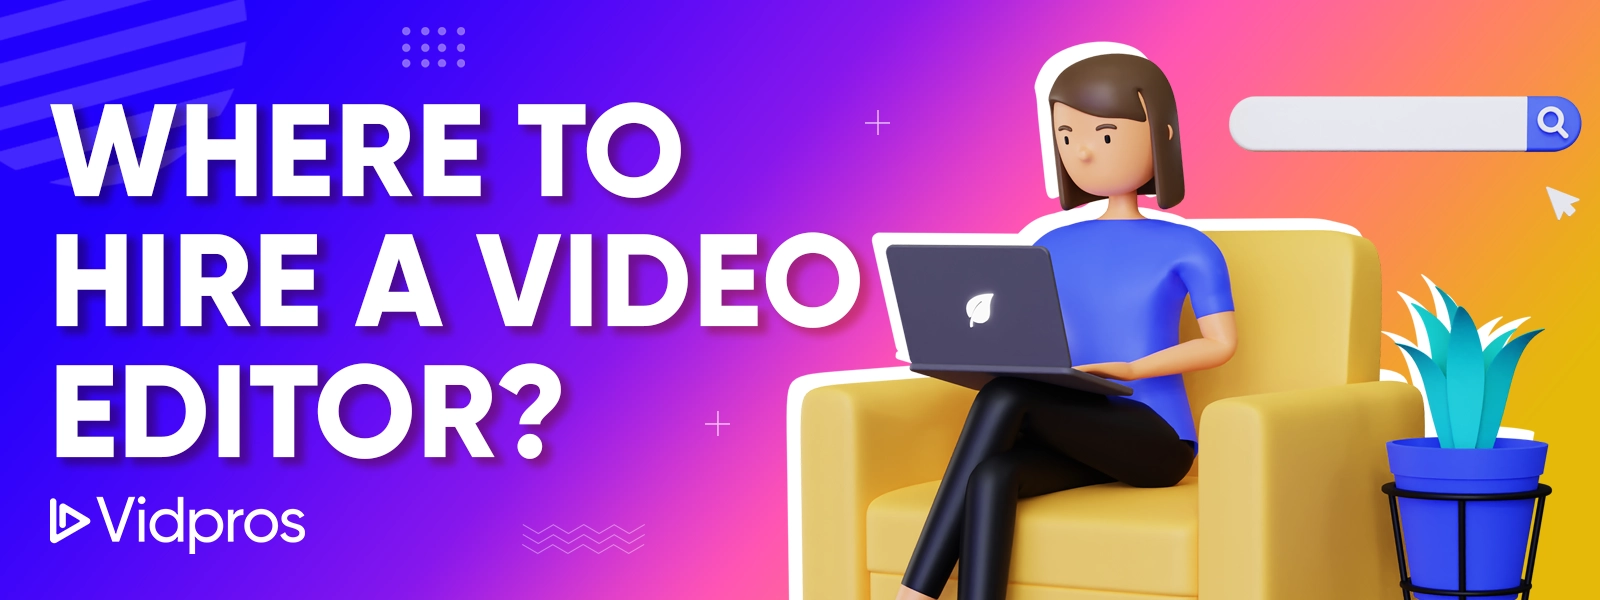 where to hire a video editor